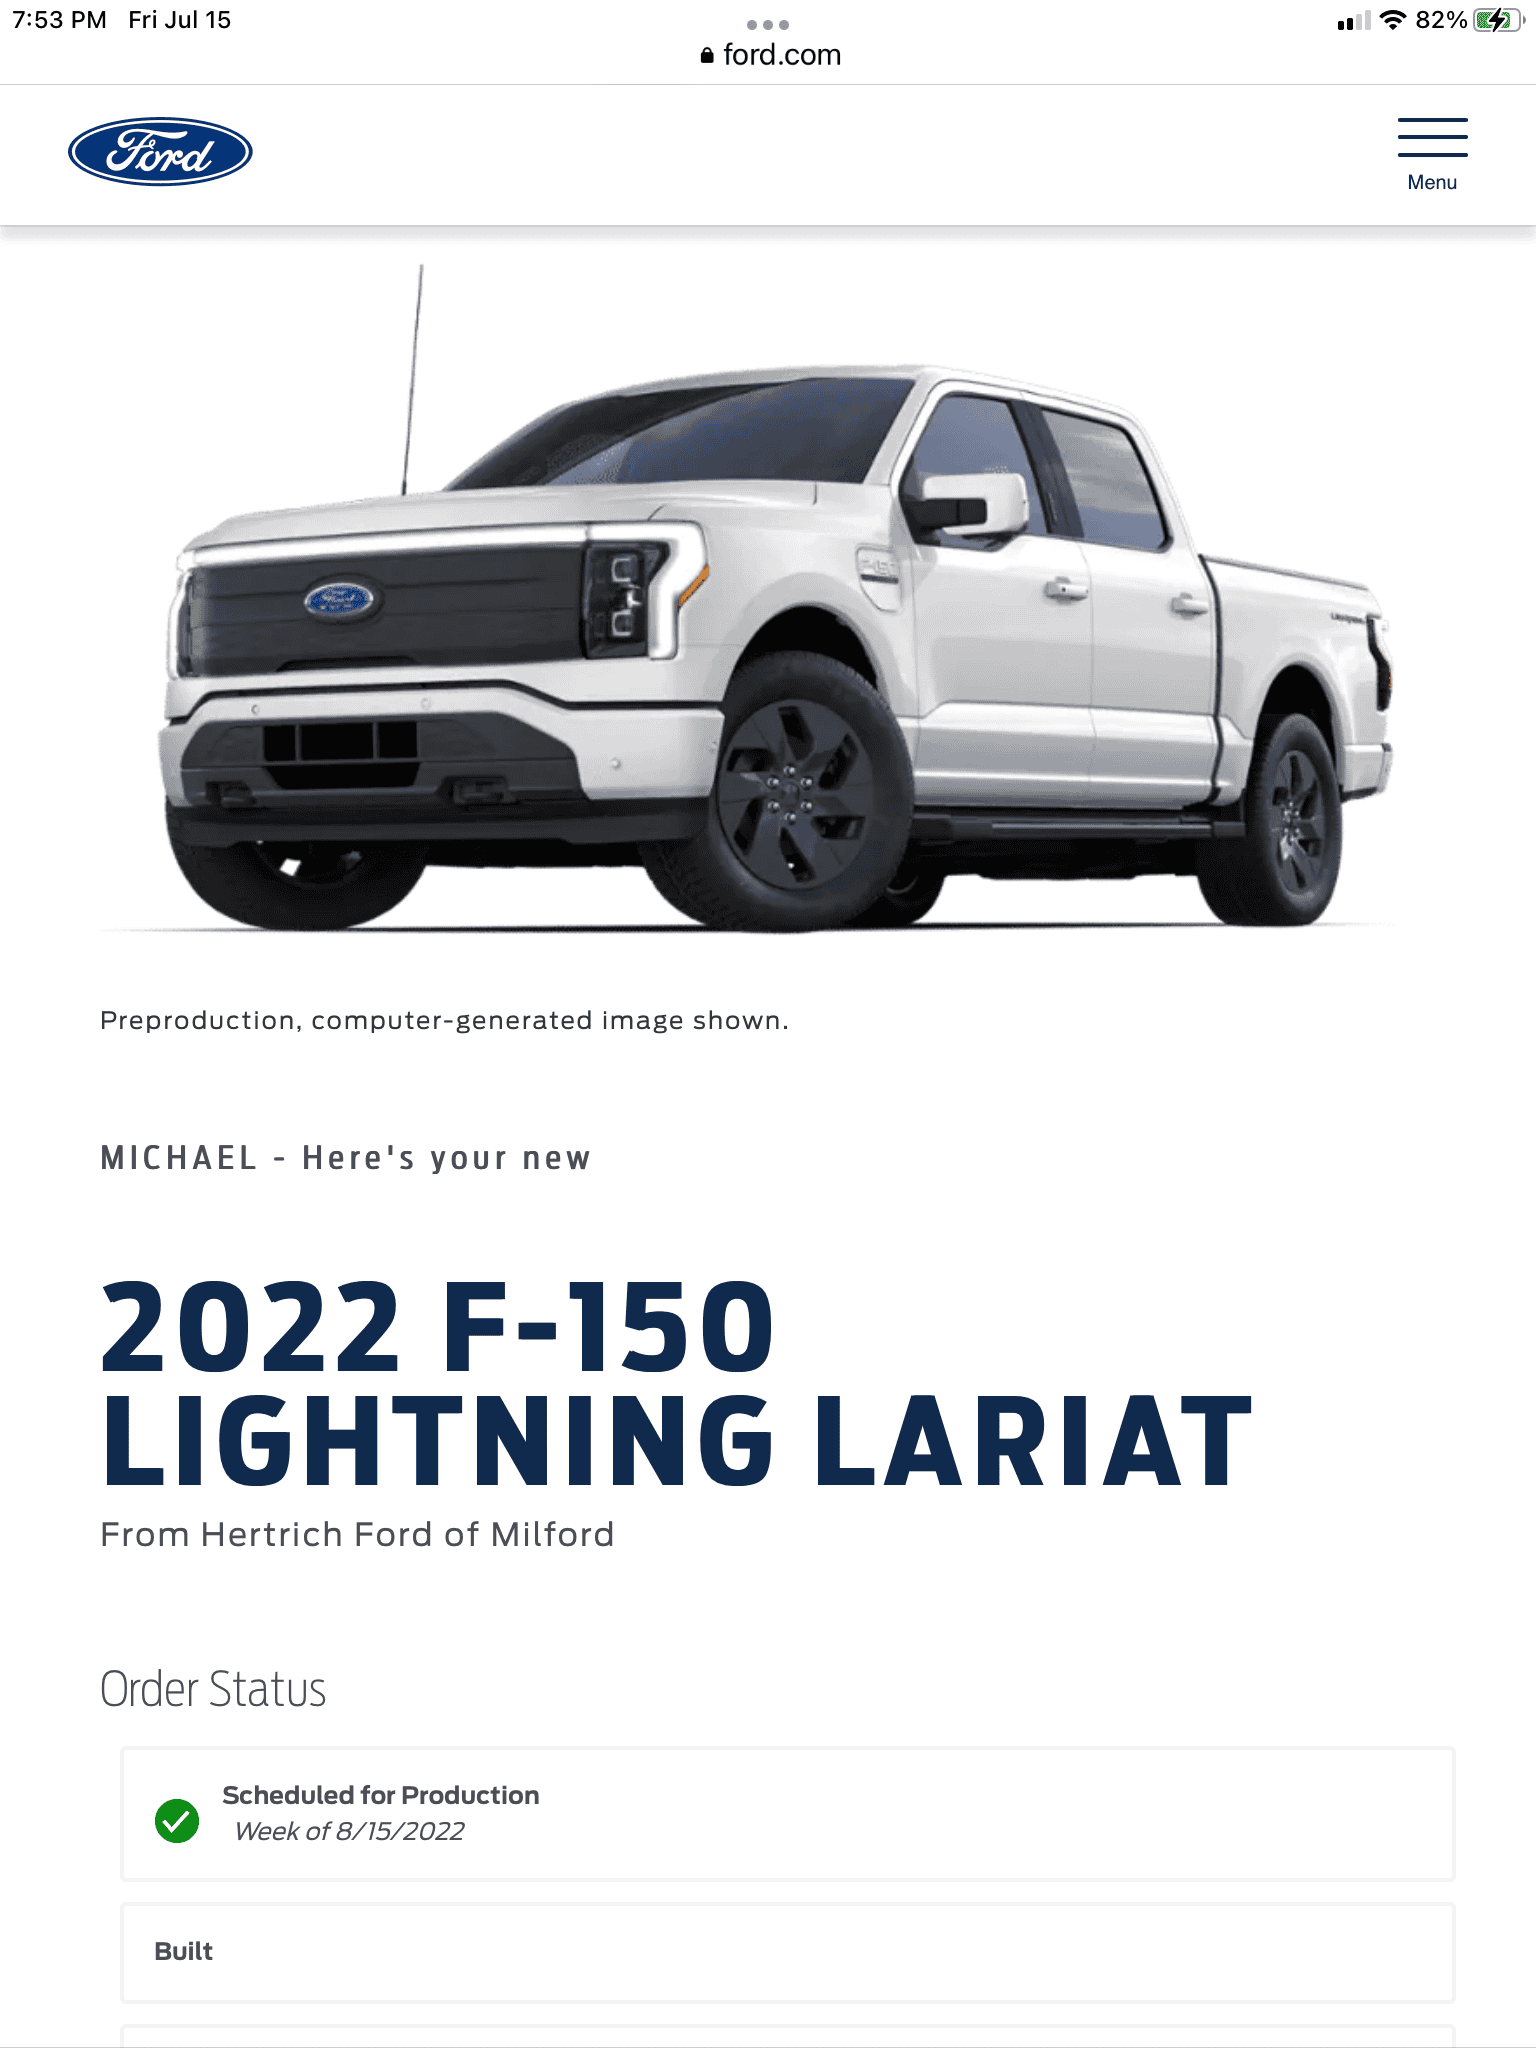 Ford F-150 Lightning Wave 7 Orders & Allocations --Phone Call from Dealer 0C252892-BD49-4A97-A741-FA9994E12F27